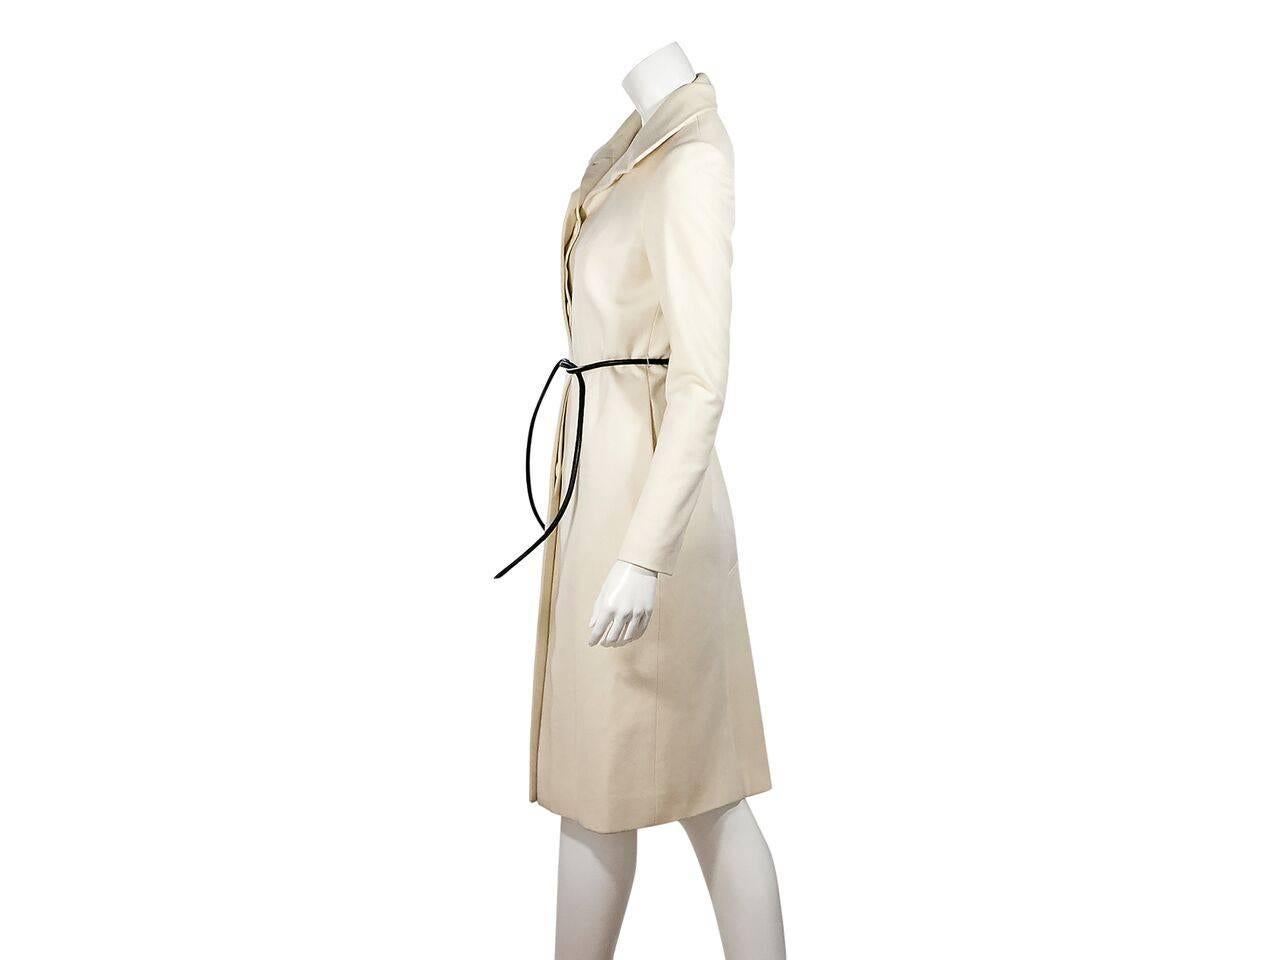 Product details:  Cream wool coat by Gucci.  Spread collar.  Long sleeves.  Concealed button-front closure.  Adjustable tie belted waist.  On-seam waist slide pockets.  Center back hem vent.  Label size IT 42. 
Condition: Pre-owned. Very good.
Est.